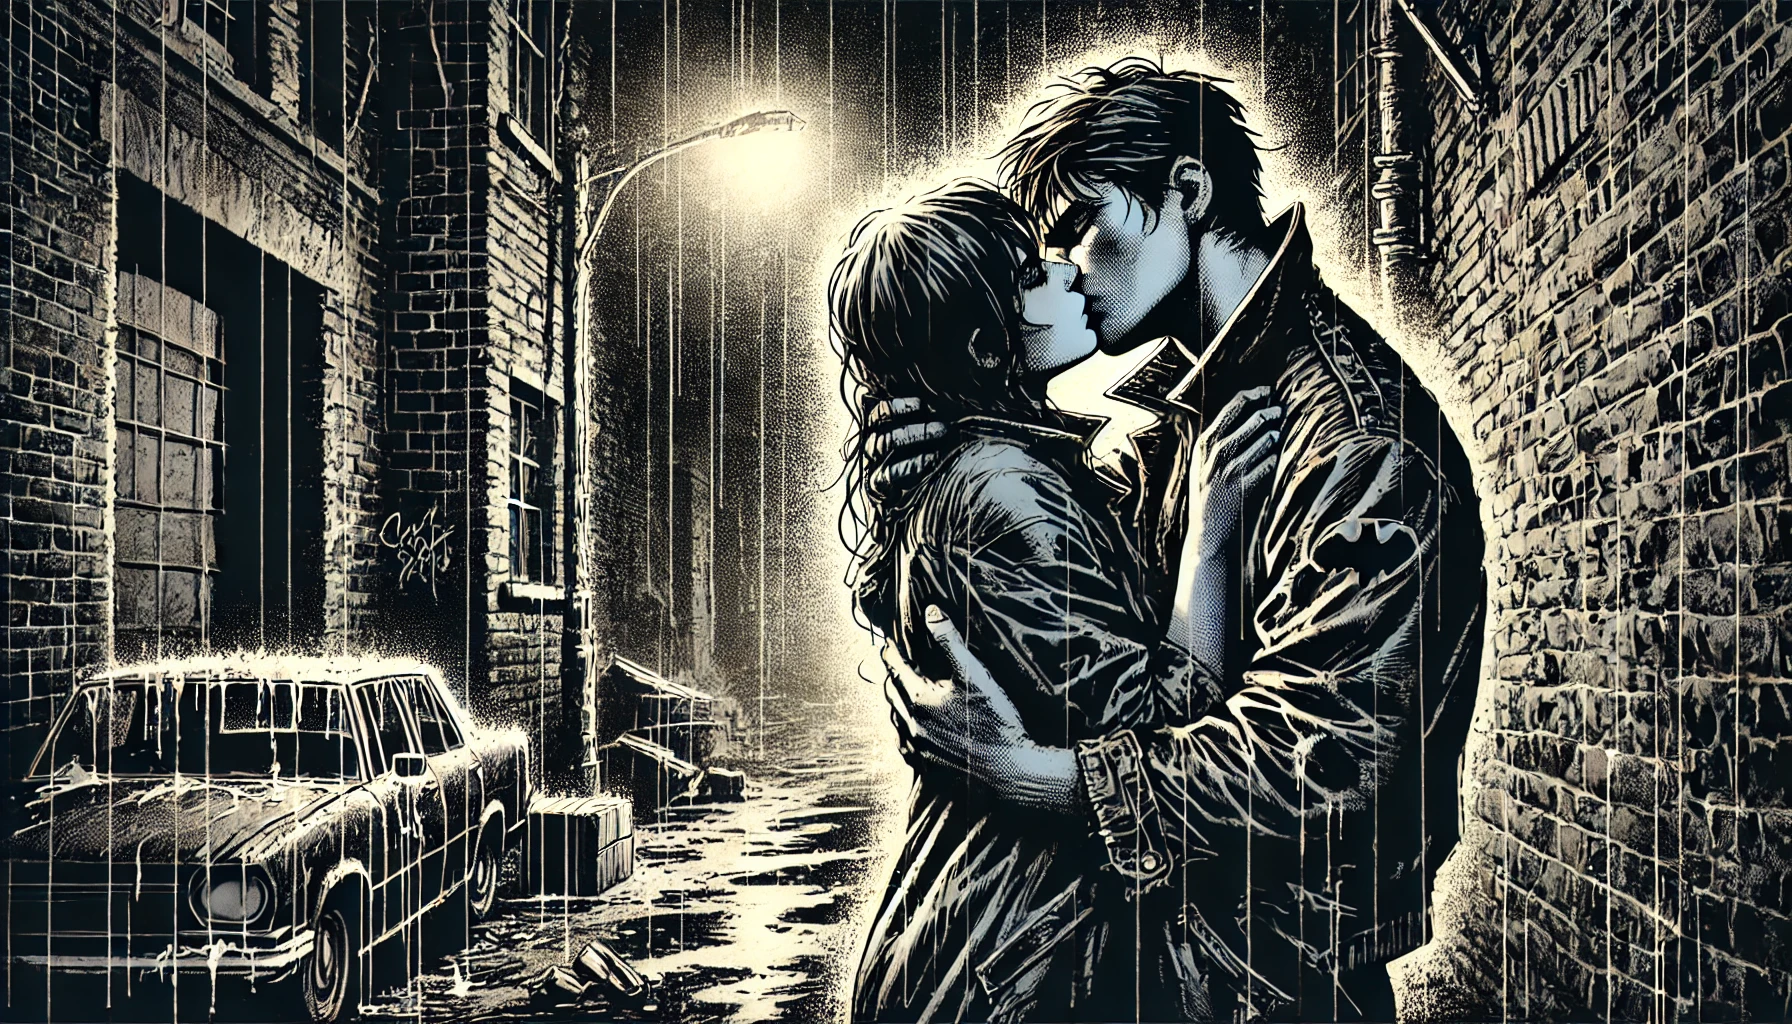 DALL·E 2024 06 29 14.40.08 A gritty, hand drawn comic book style image of a couple kissing passionately. The couple is standing in a dark, rain soaked alleyway illuminated by a